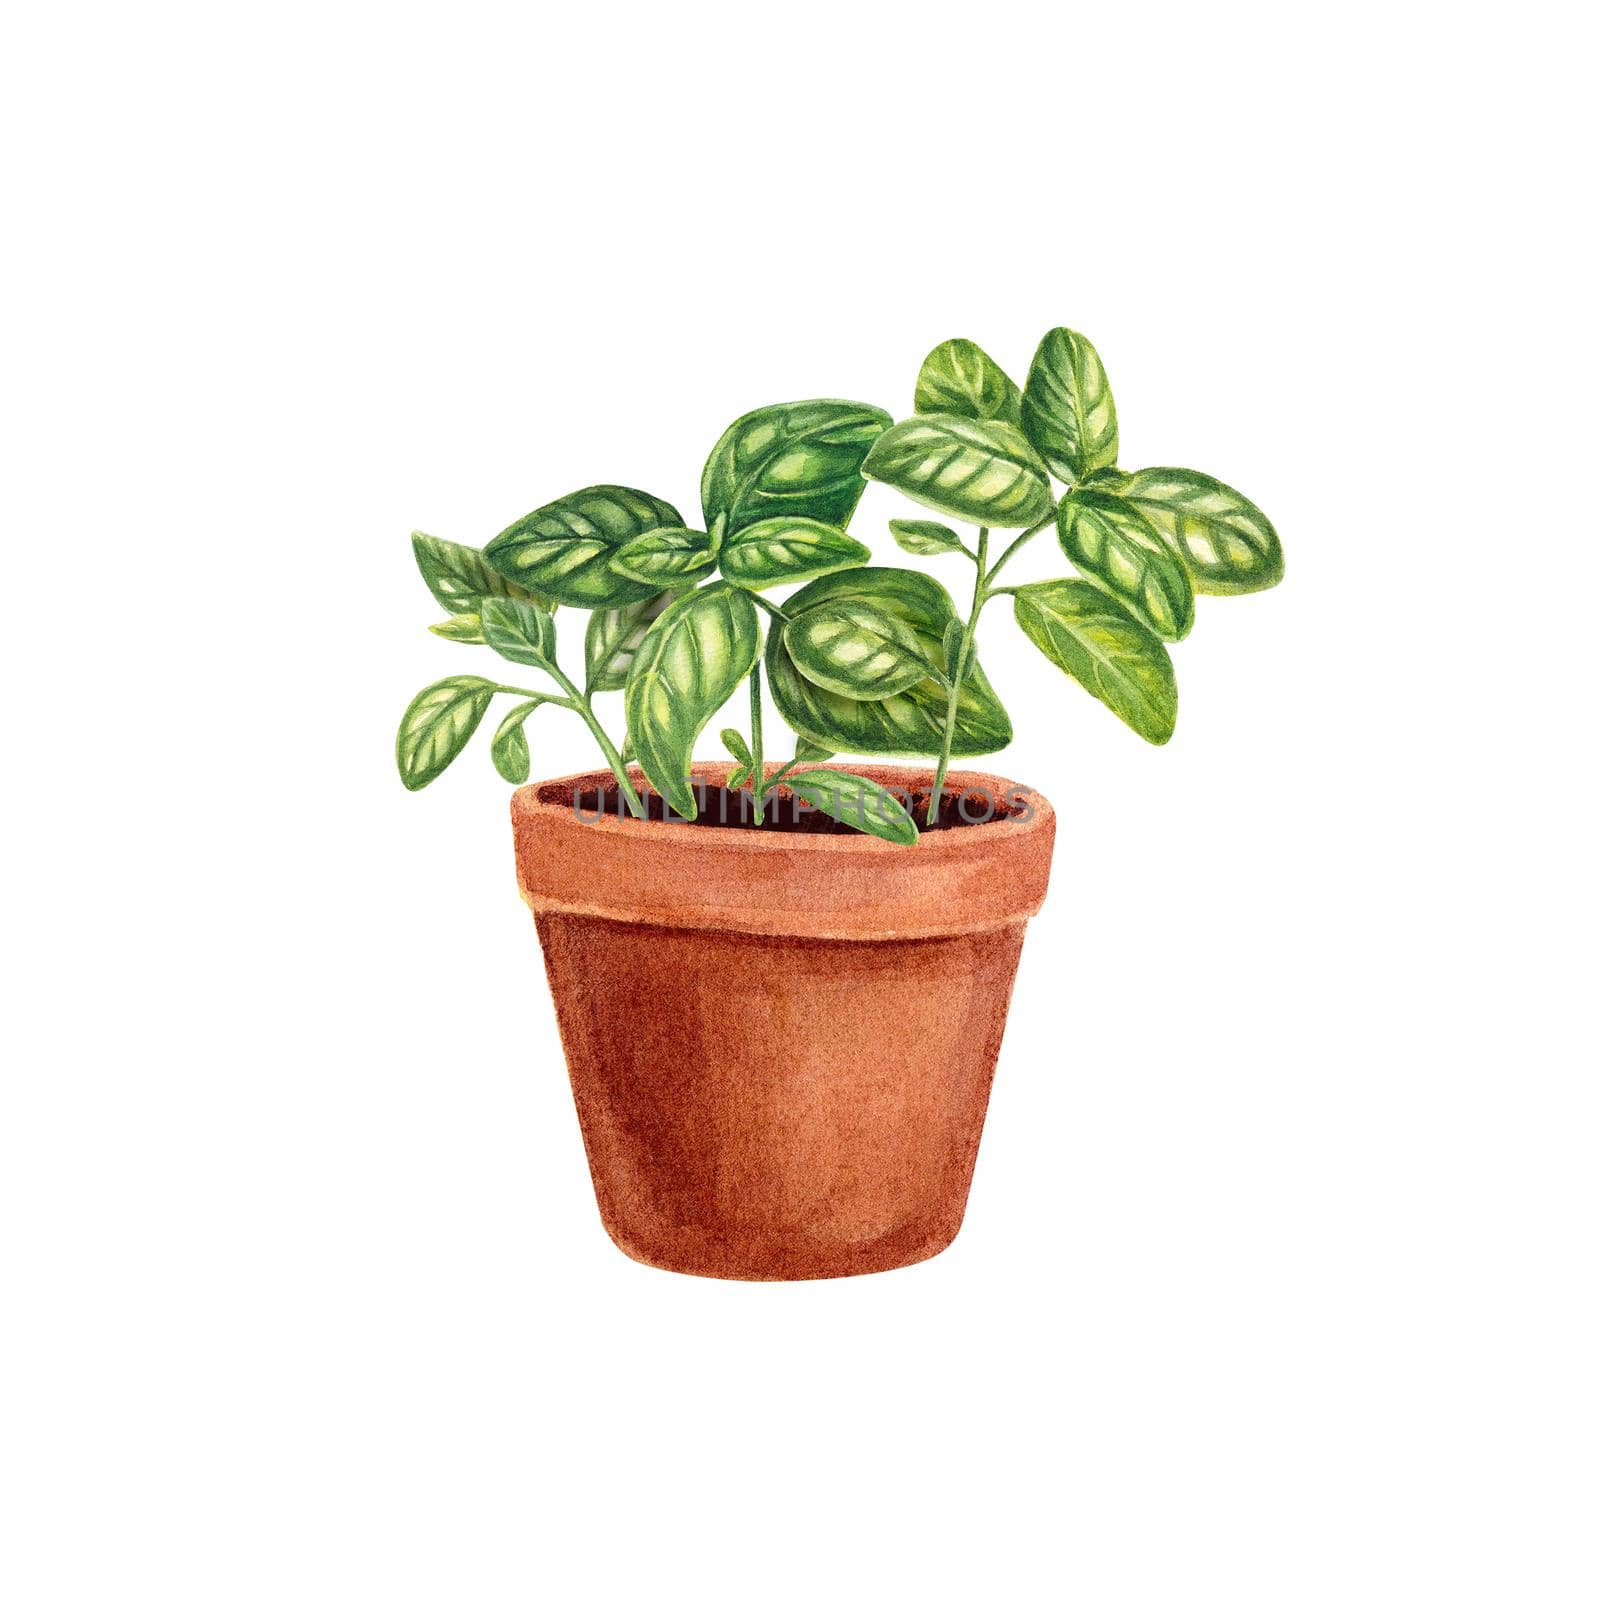 Basil in a pot isolated on a white background. Provencal herbs in watercolor. Illustration of kitchen herbs and spices. Suitable for postcards, business cards, banners, booklets, design, textiles.